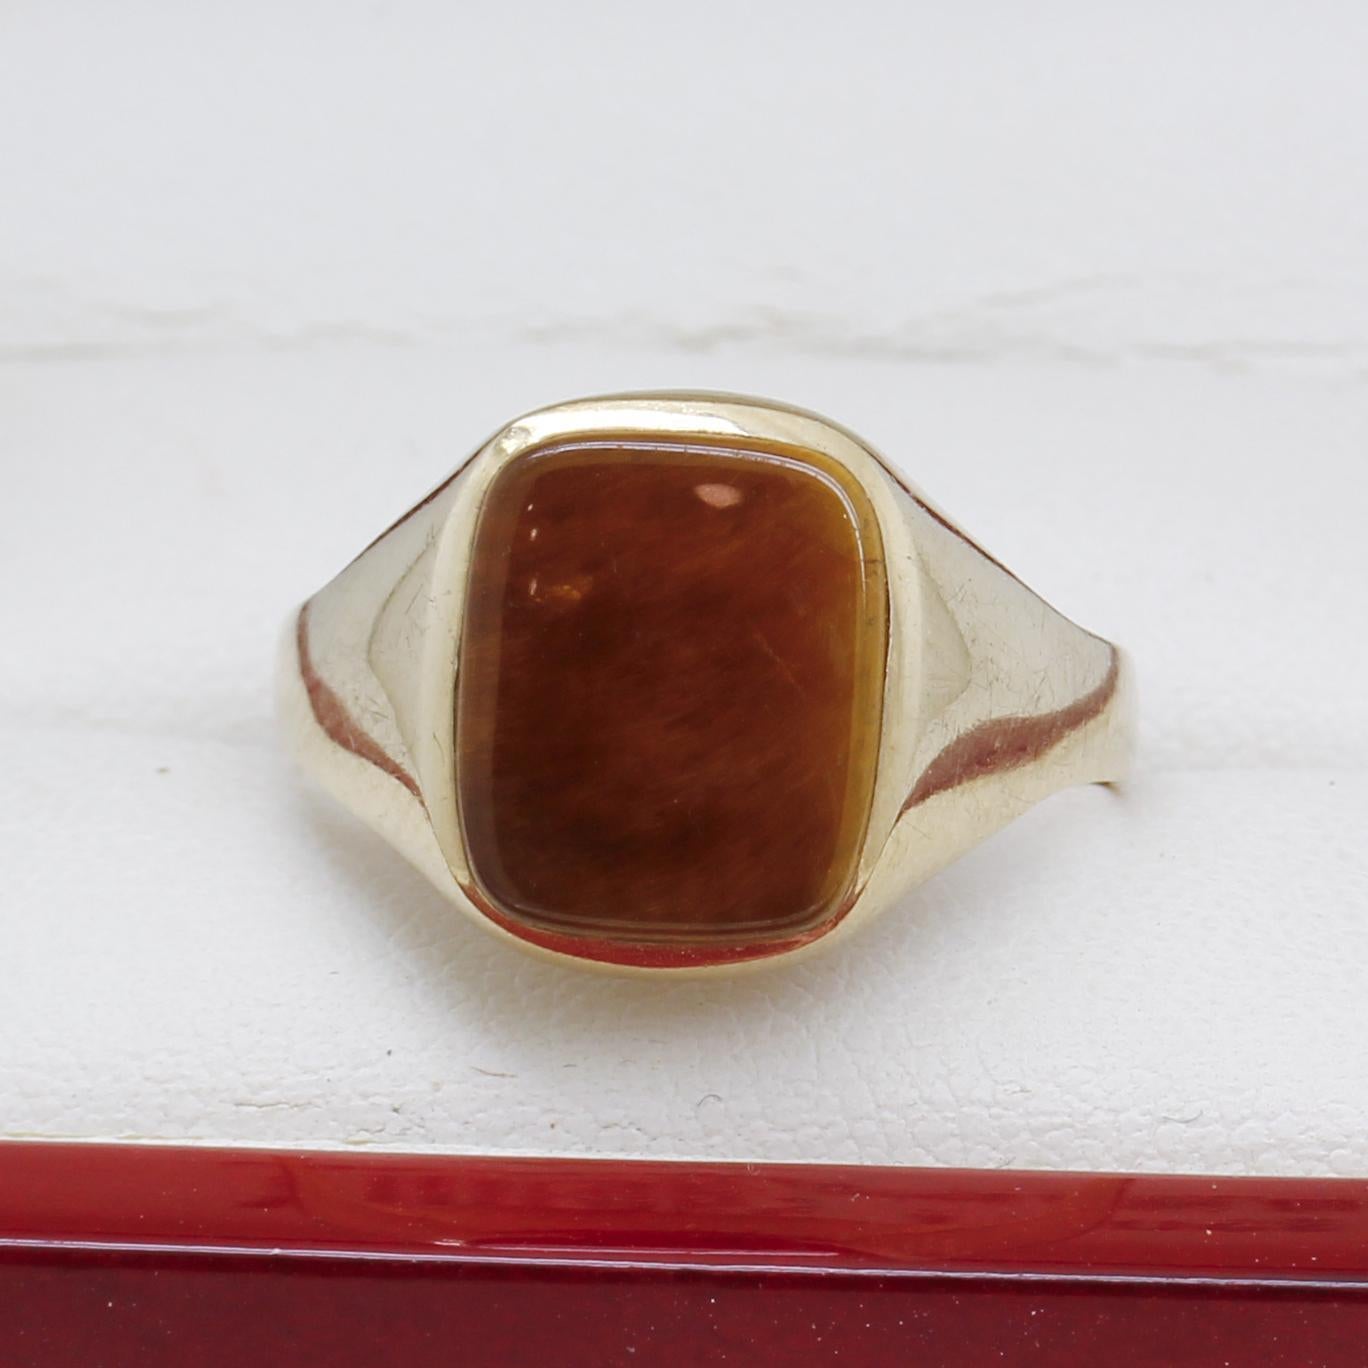 Golden Brown Agate 9ct Yellow Gold Signet Ring,
Marked London 1985 375
Signet 11x9.5mm
Weight 2.37 grams
Ring size R